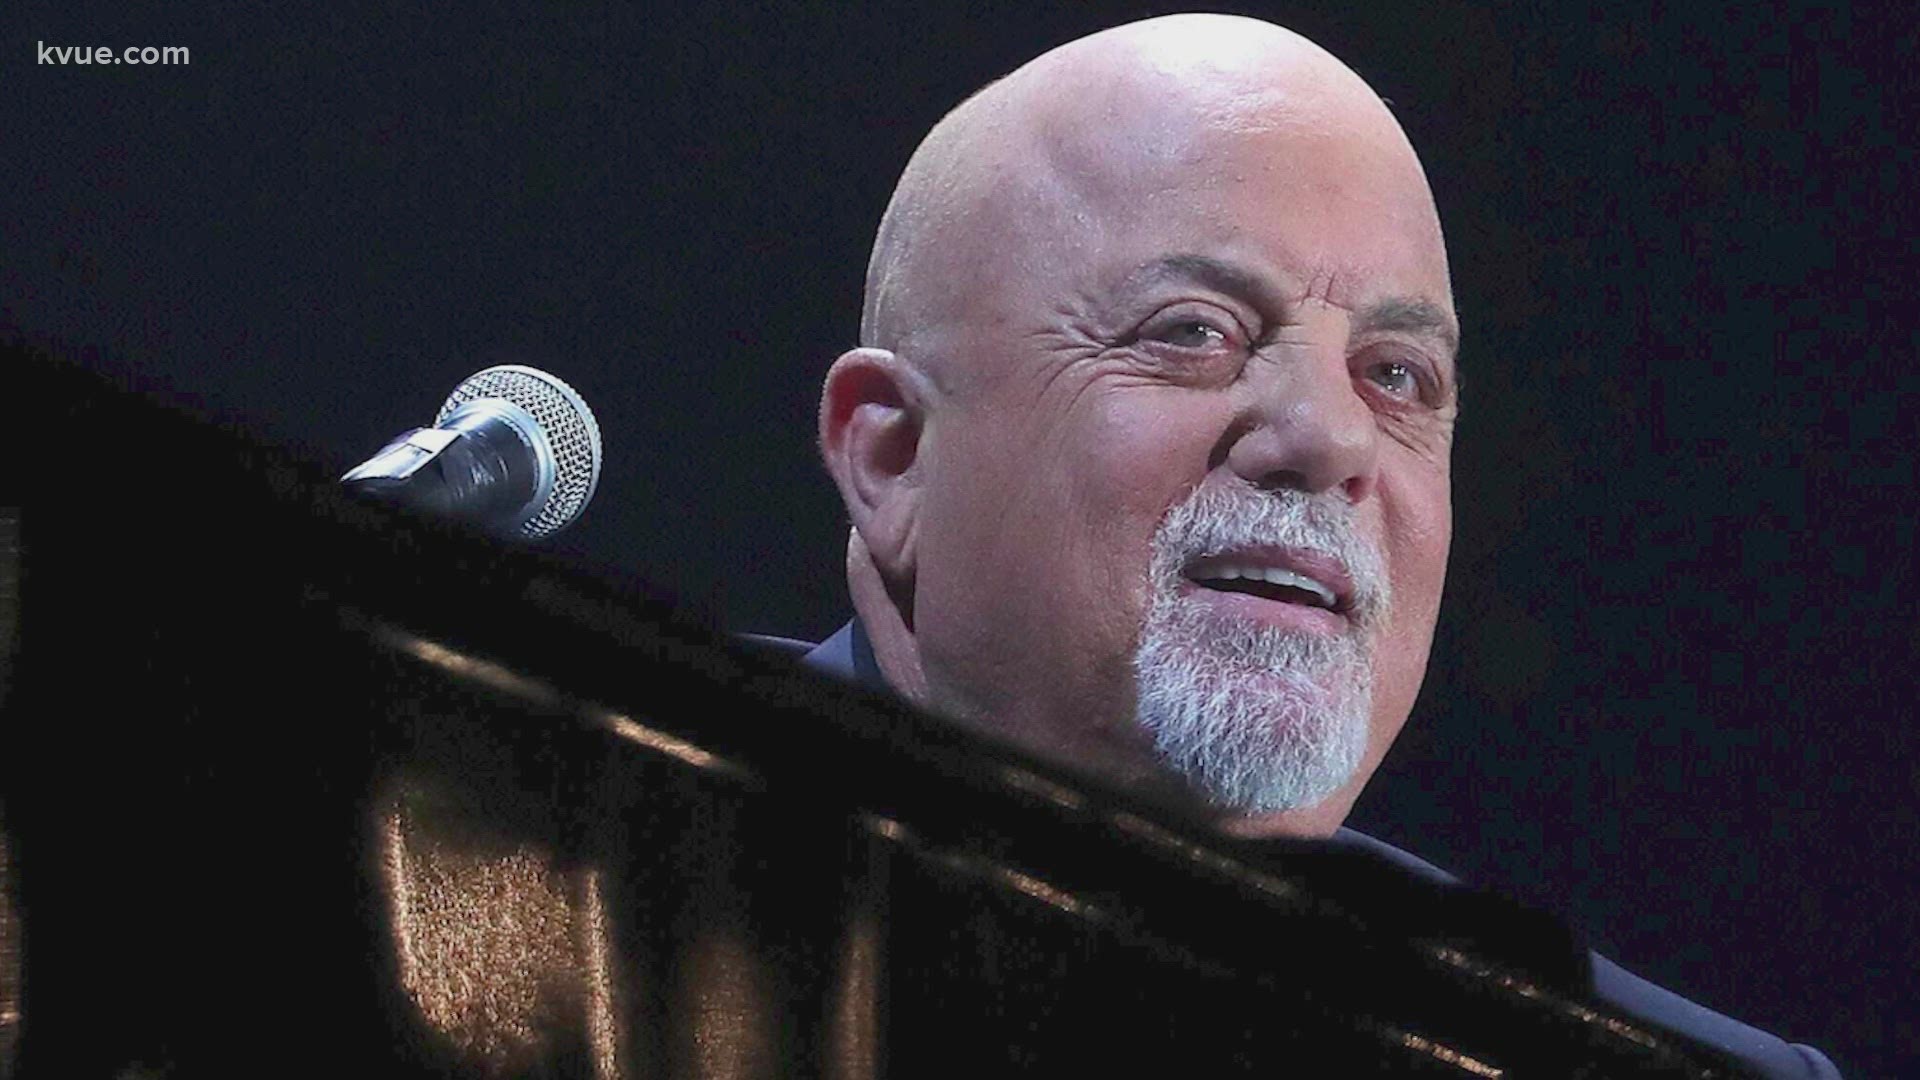 The piano man will headline a concert at COTA during the Formula One event on Oct. 23.